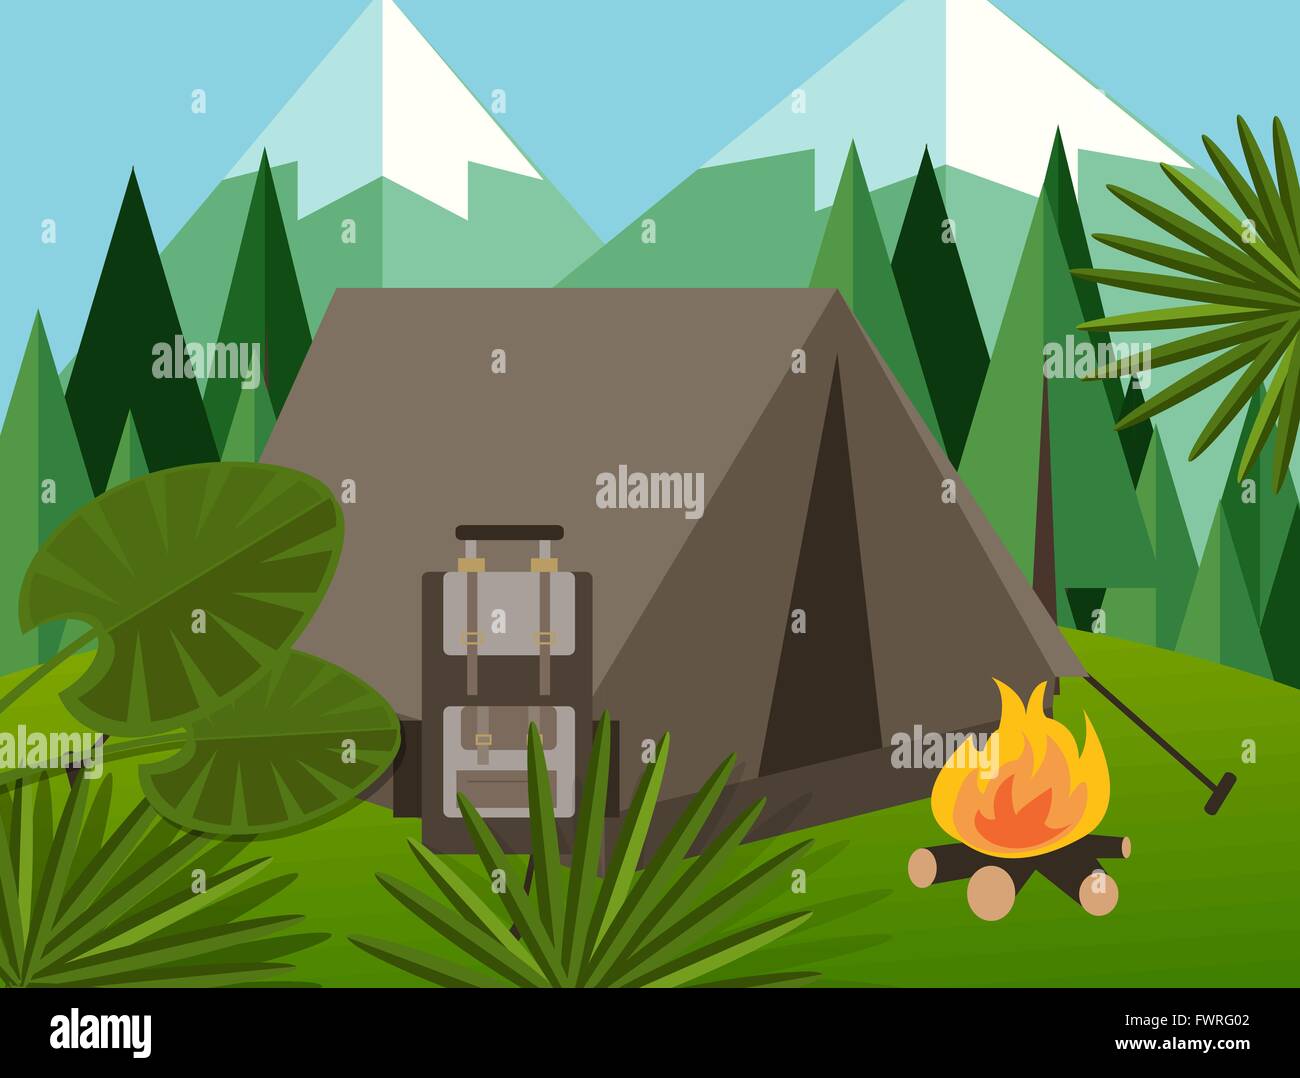 camp forest mountain flat background illustration pine tree backpack fire jungle vector graphic Stock Vector